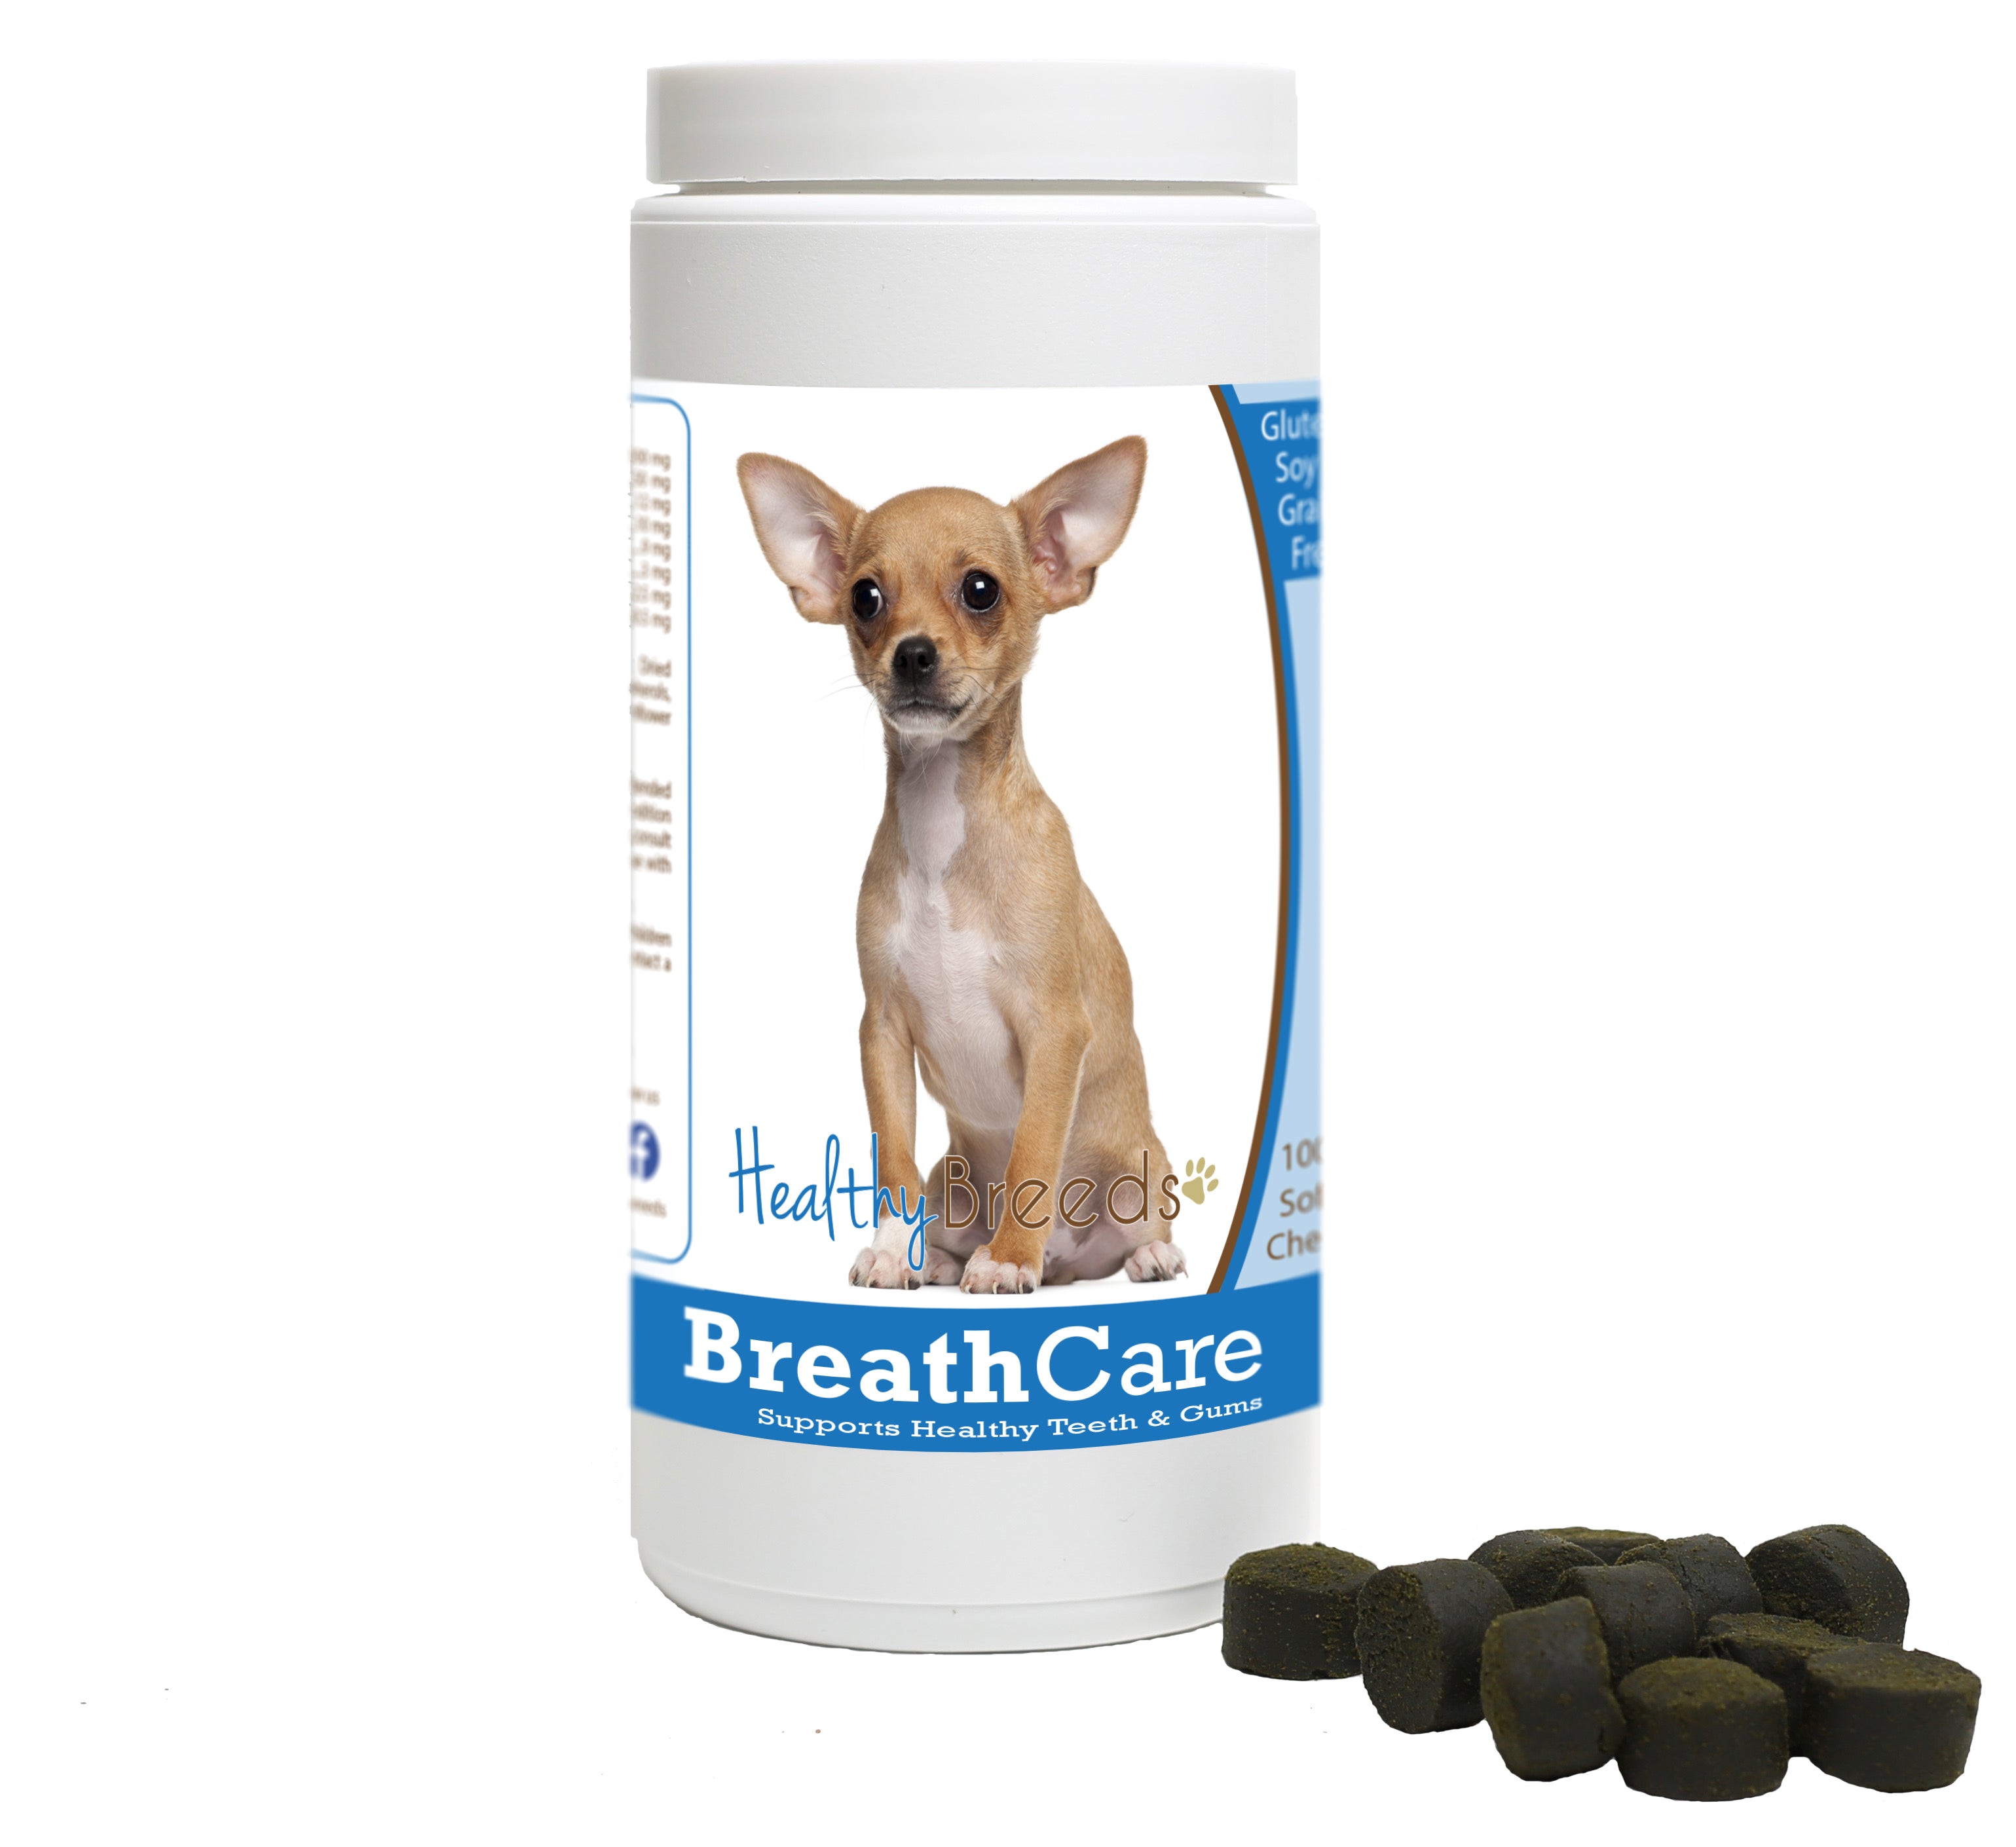 Chihuahua Breath Care Soft Chews for Dogs 60 Count